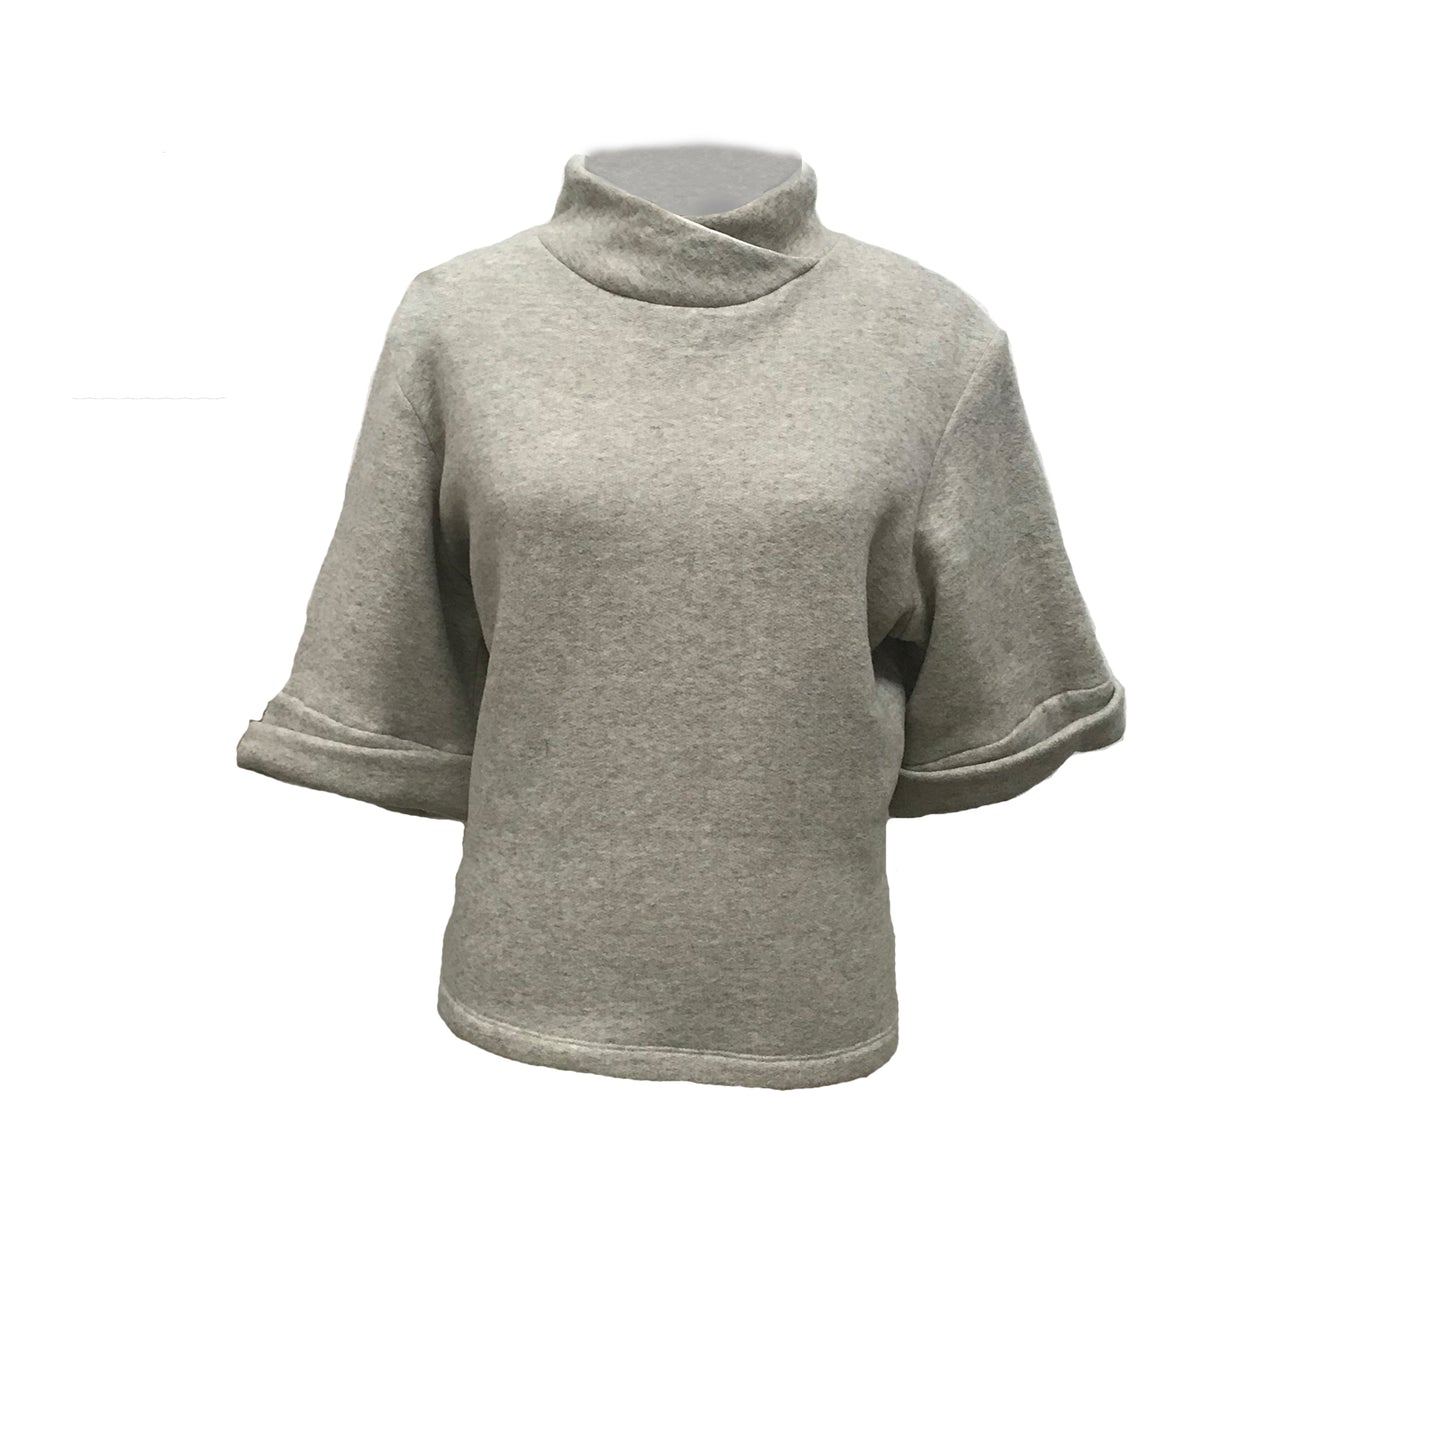 Gray sweater with short sleeves and fold over collar